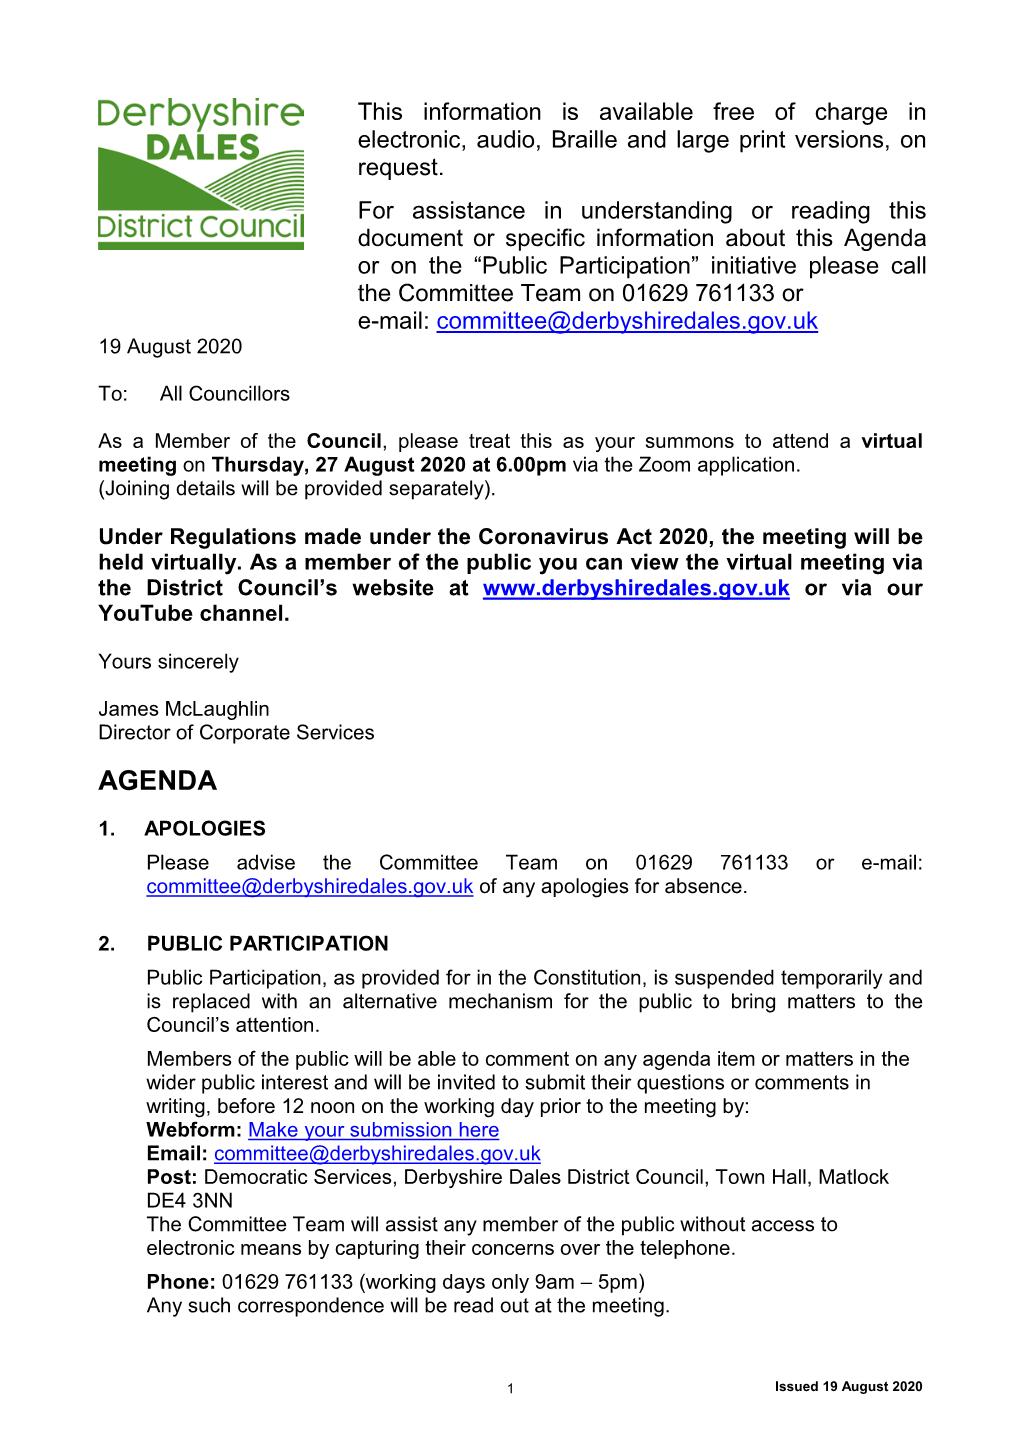 Agenda Or on the “Public Participation” Initiative Please Call the Committee Team on 01629 761133 Or E-Mail: Committee@Derbyshiredales.Gov.Uk 19 August 2020